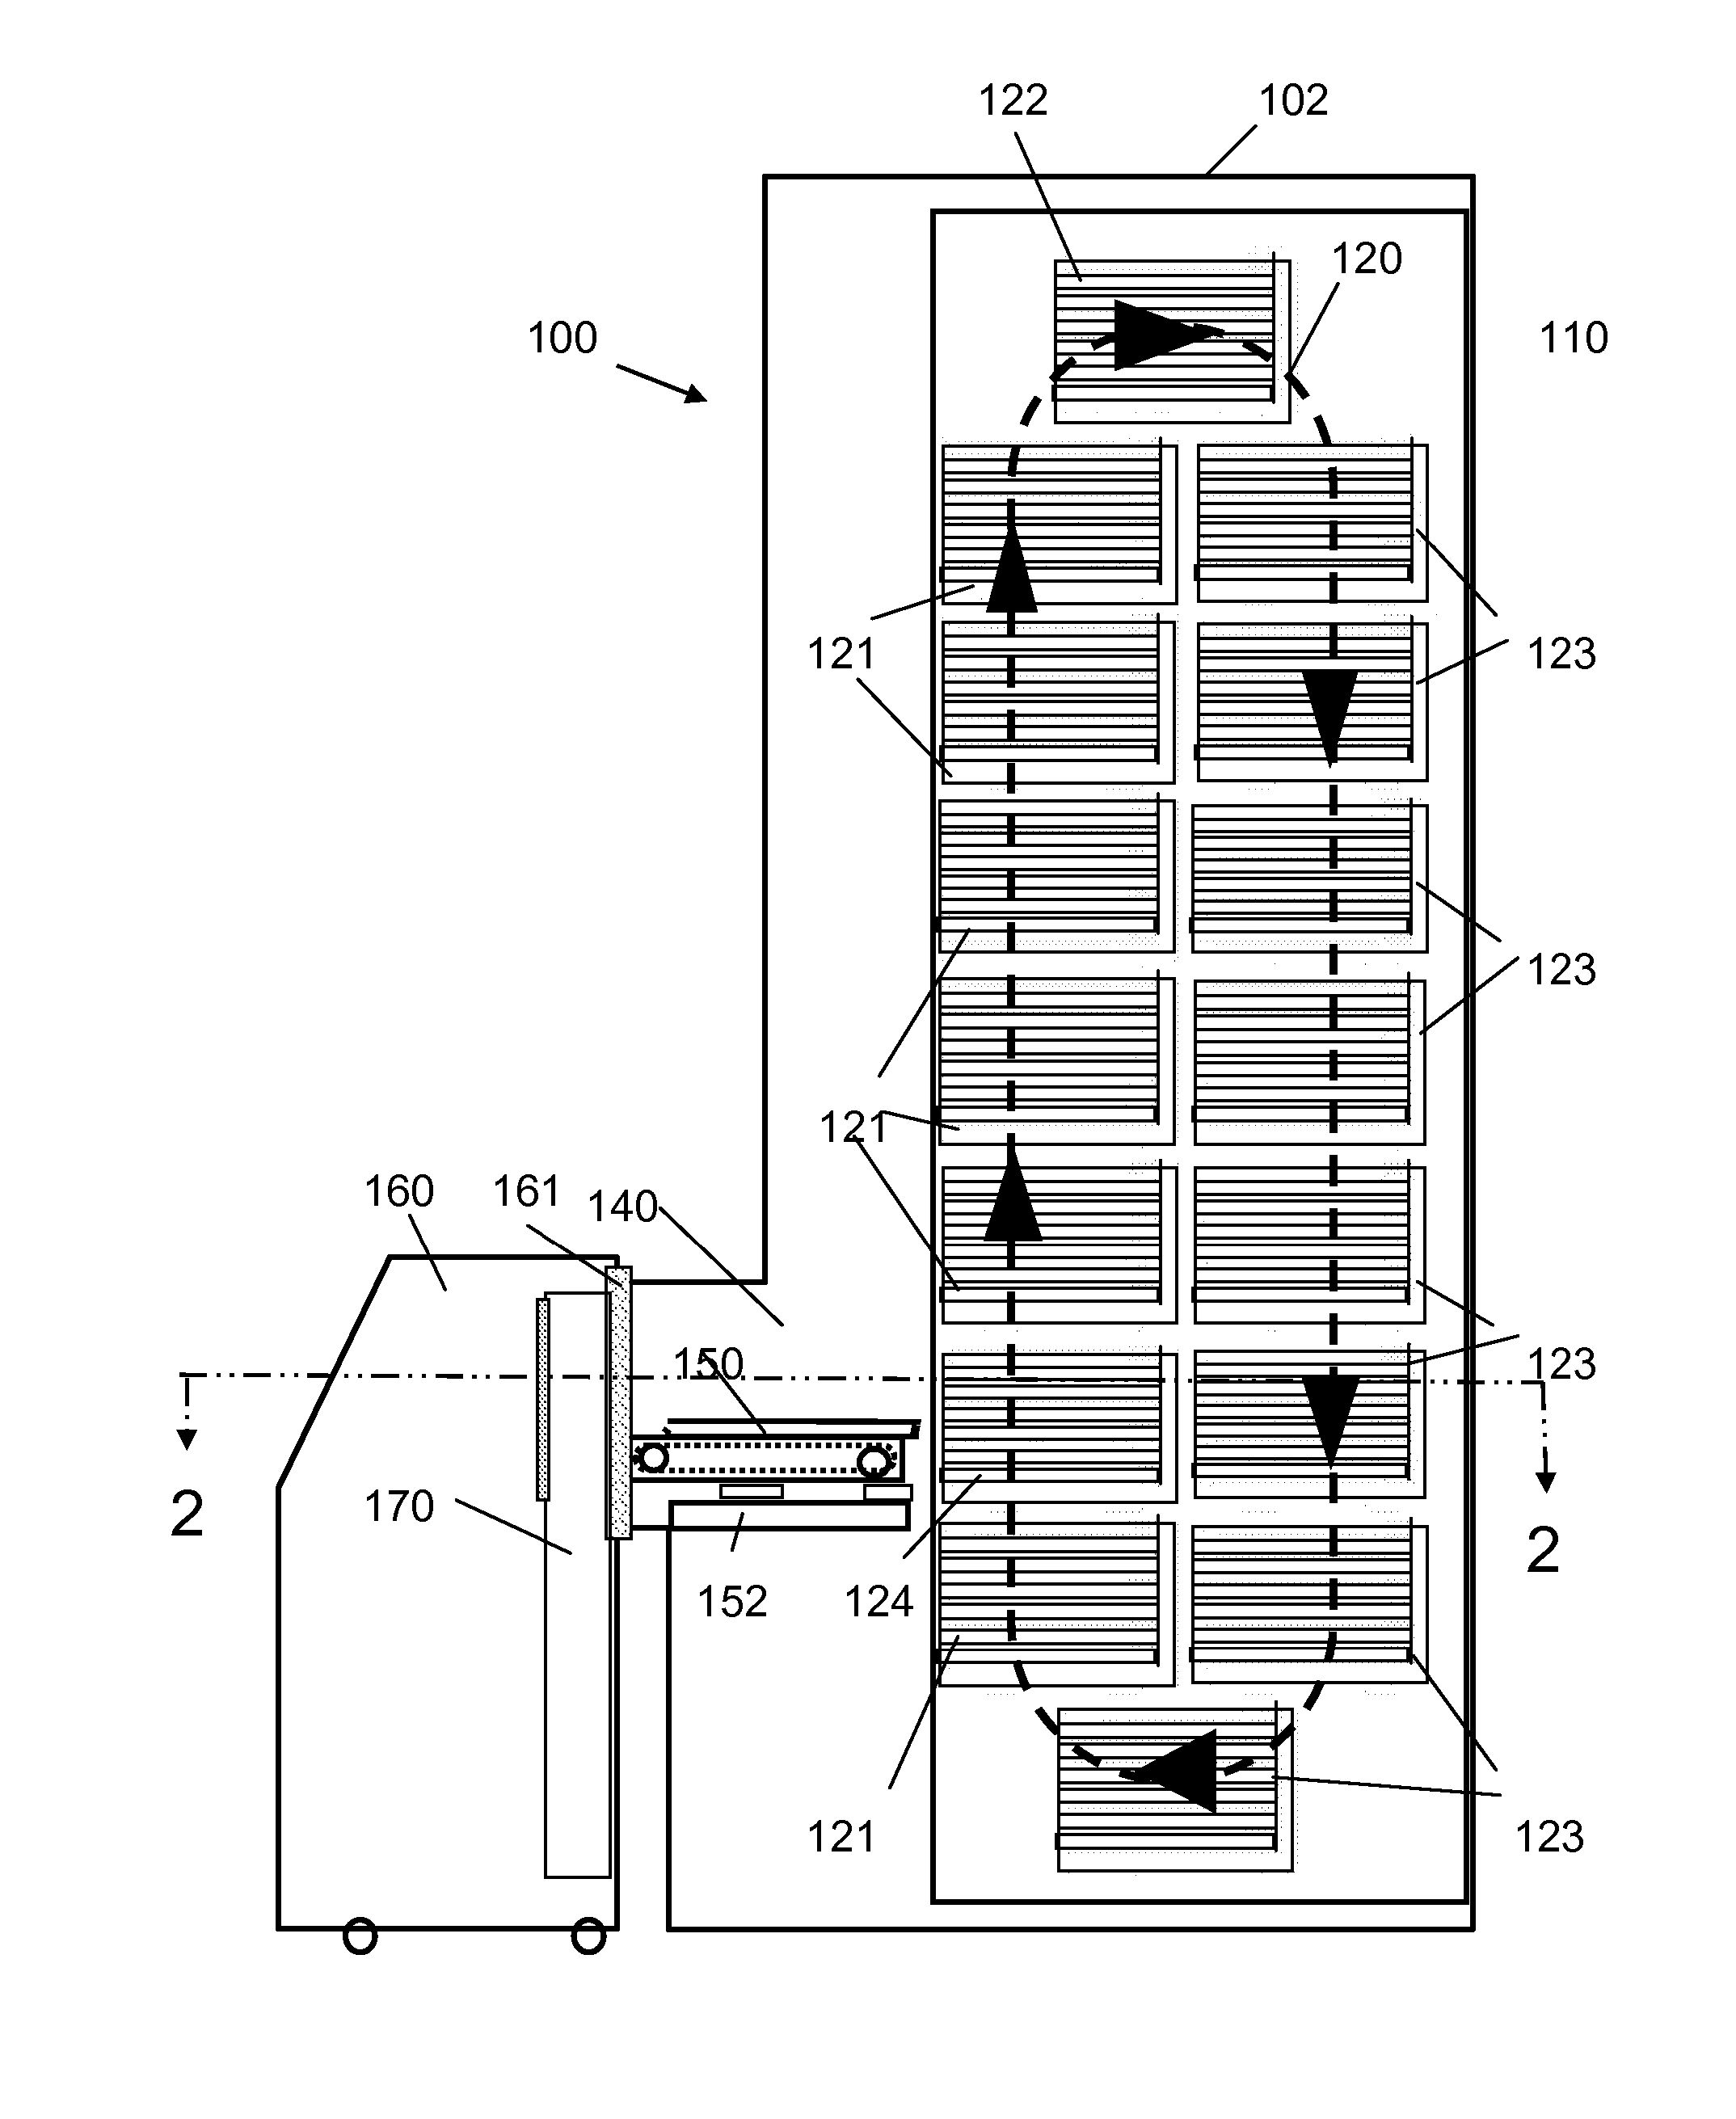 Device and method for retrieving or replacing a tray within a storage compartment